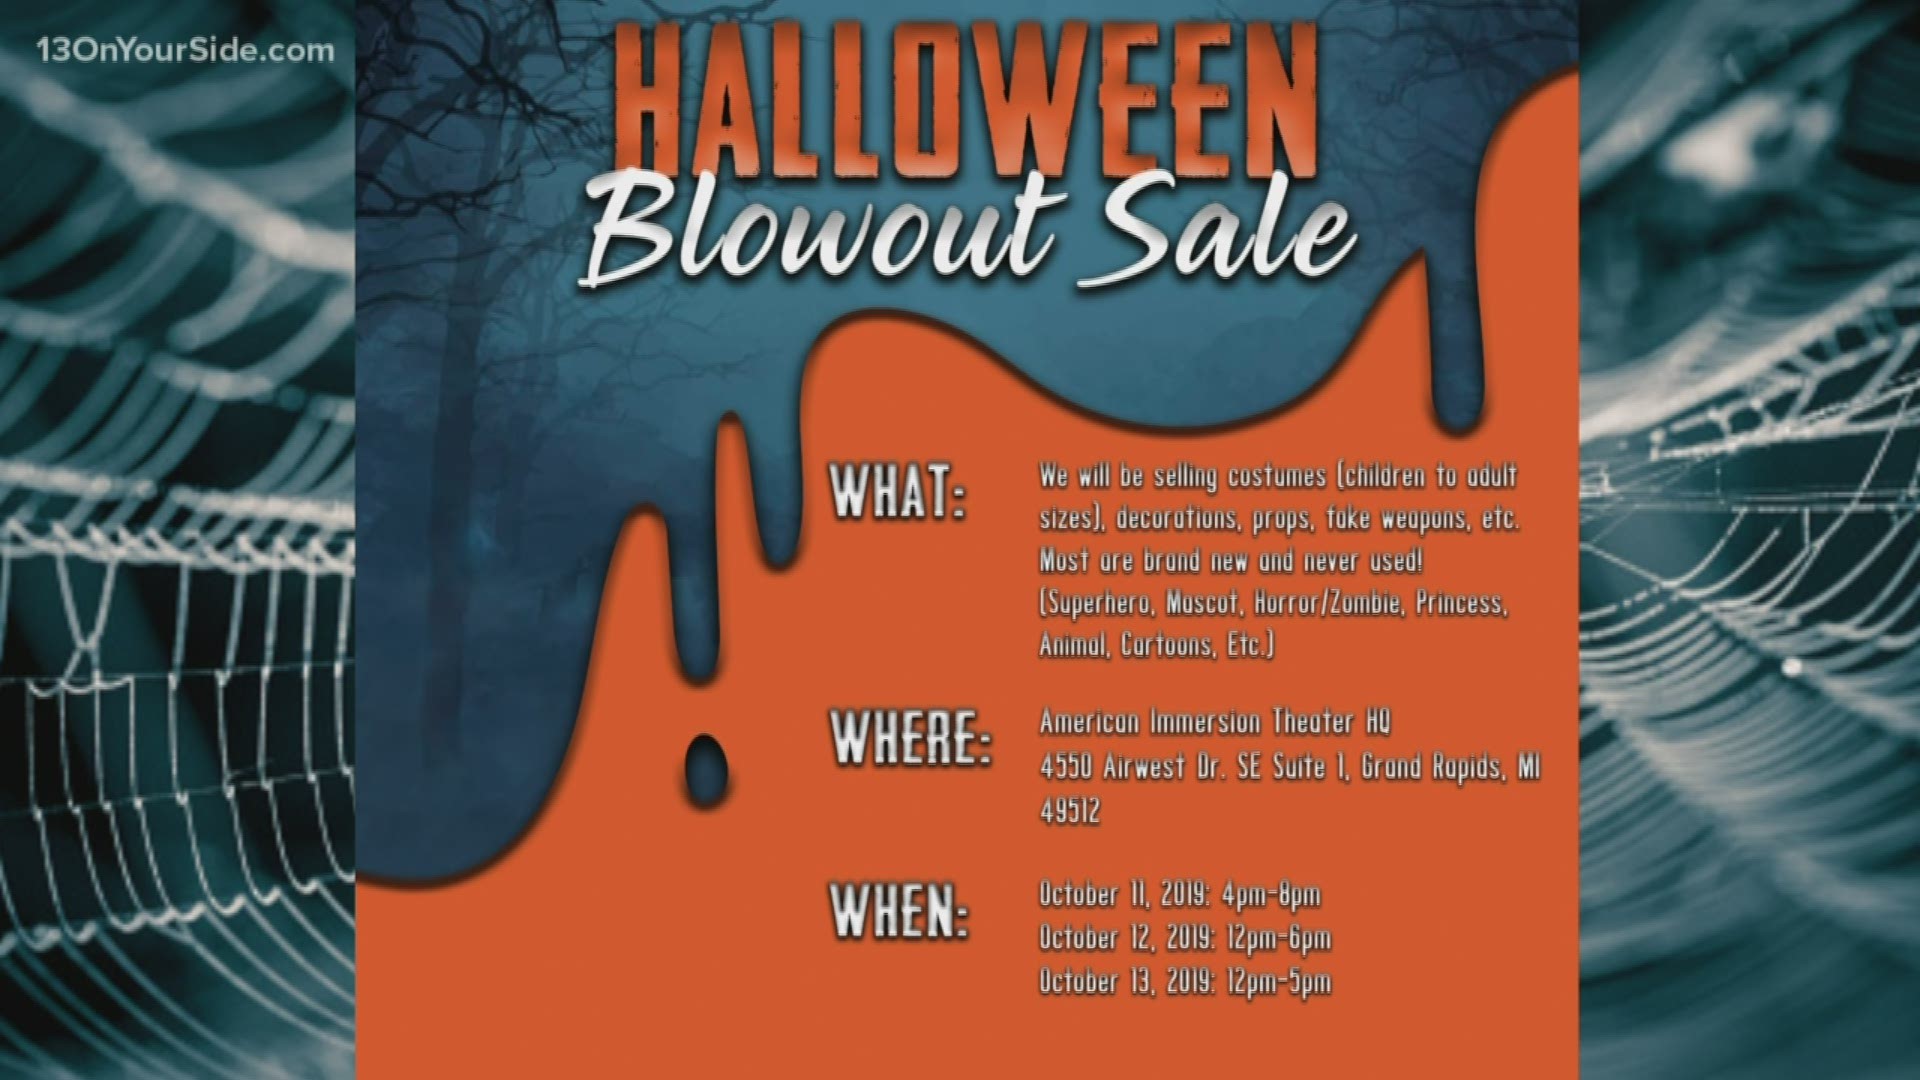 Halloween is almost here and American Immersion Theater joins 13 ON YOUR SIDE to tell us more about their sale.